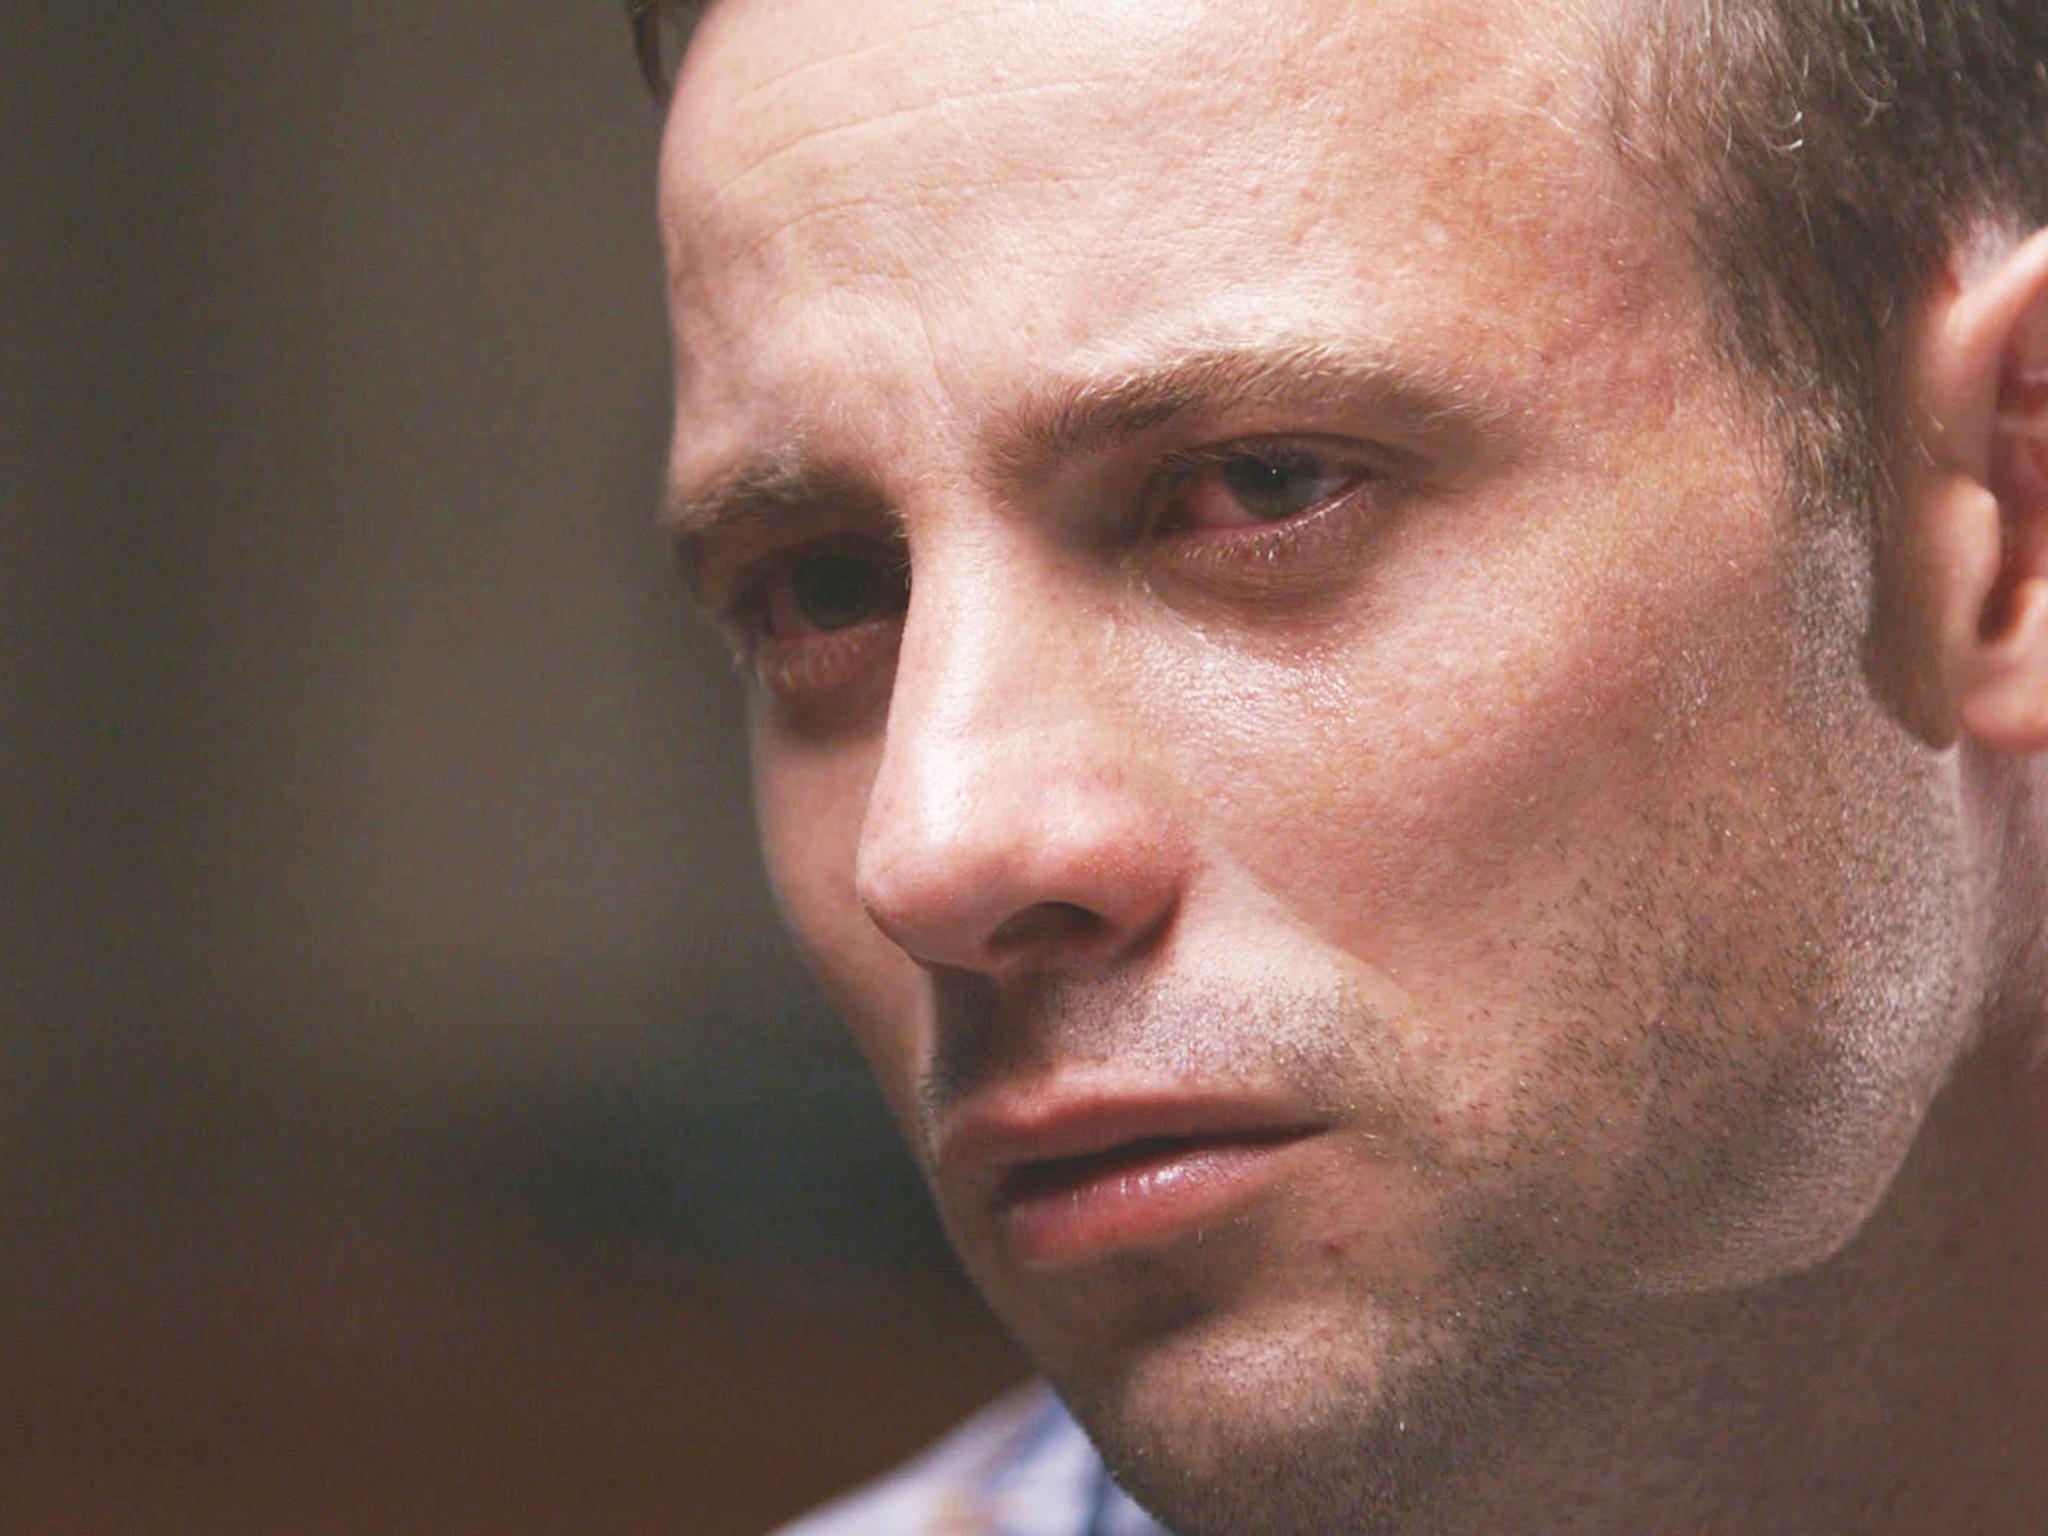 In the documentary, Pistorius gives his account of what happened the night he killed his girlfriend